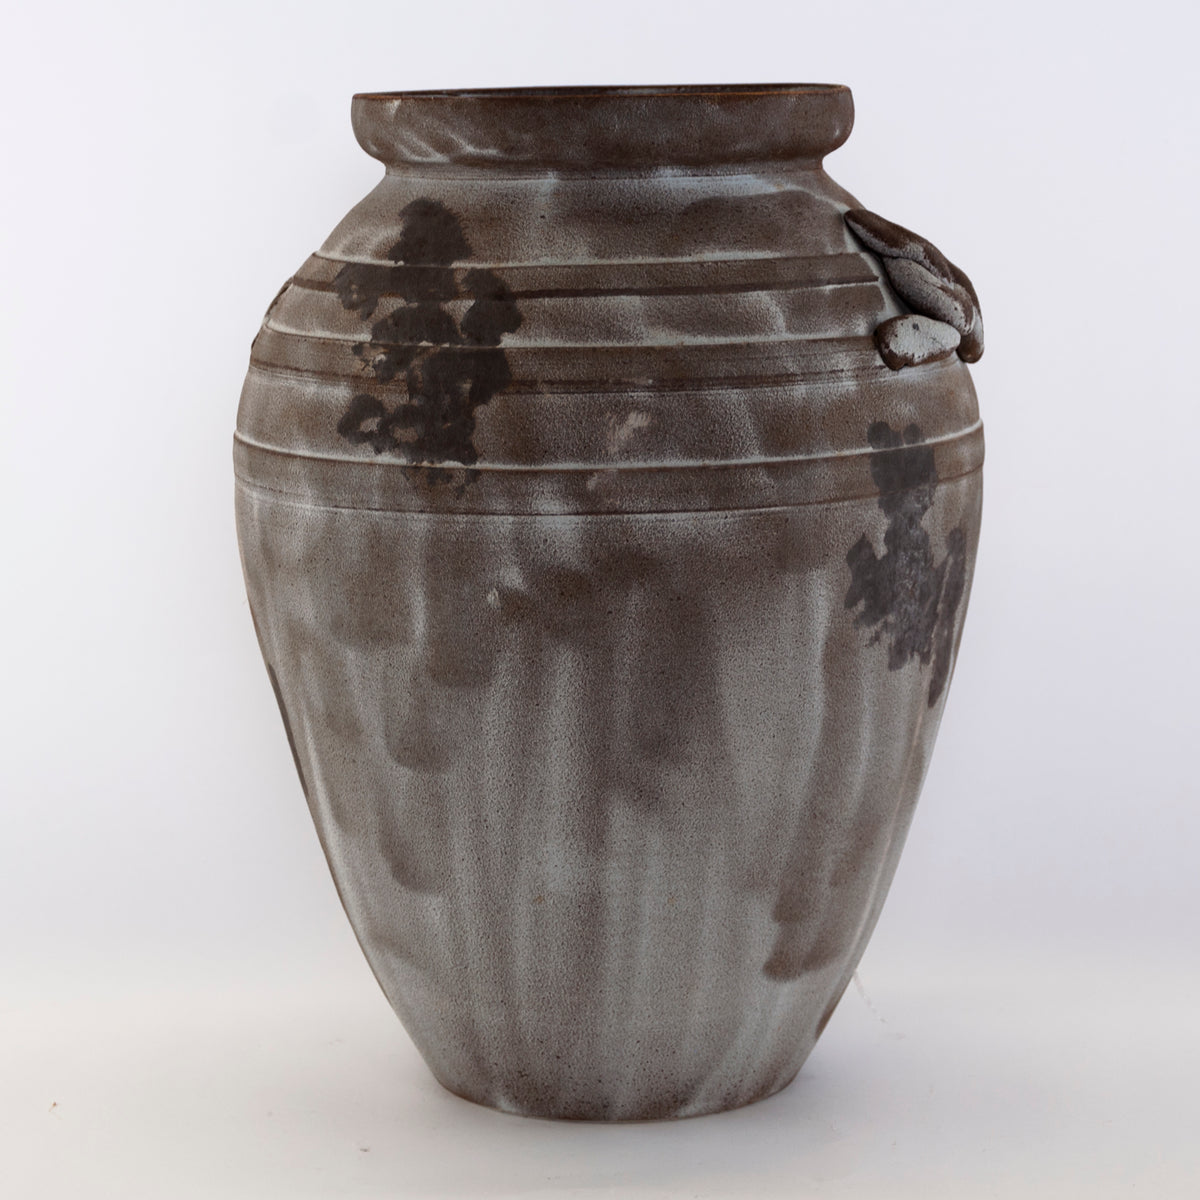 Aged Series Vases and Pots - BUBULAND HOME